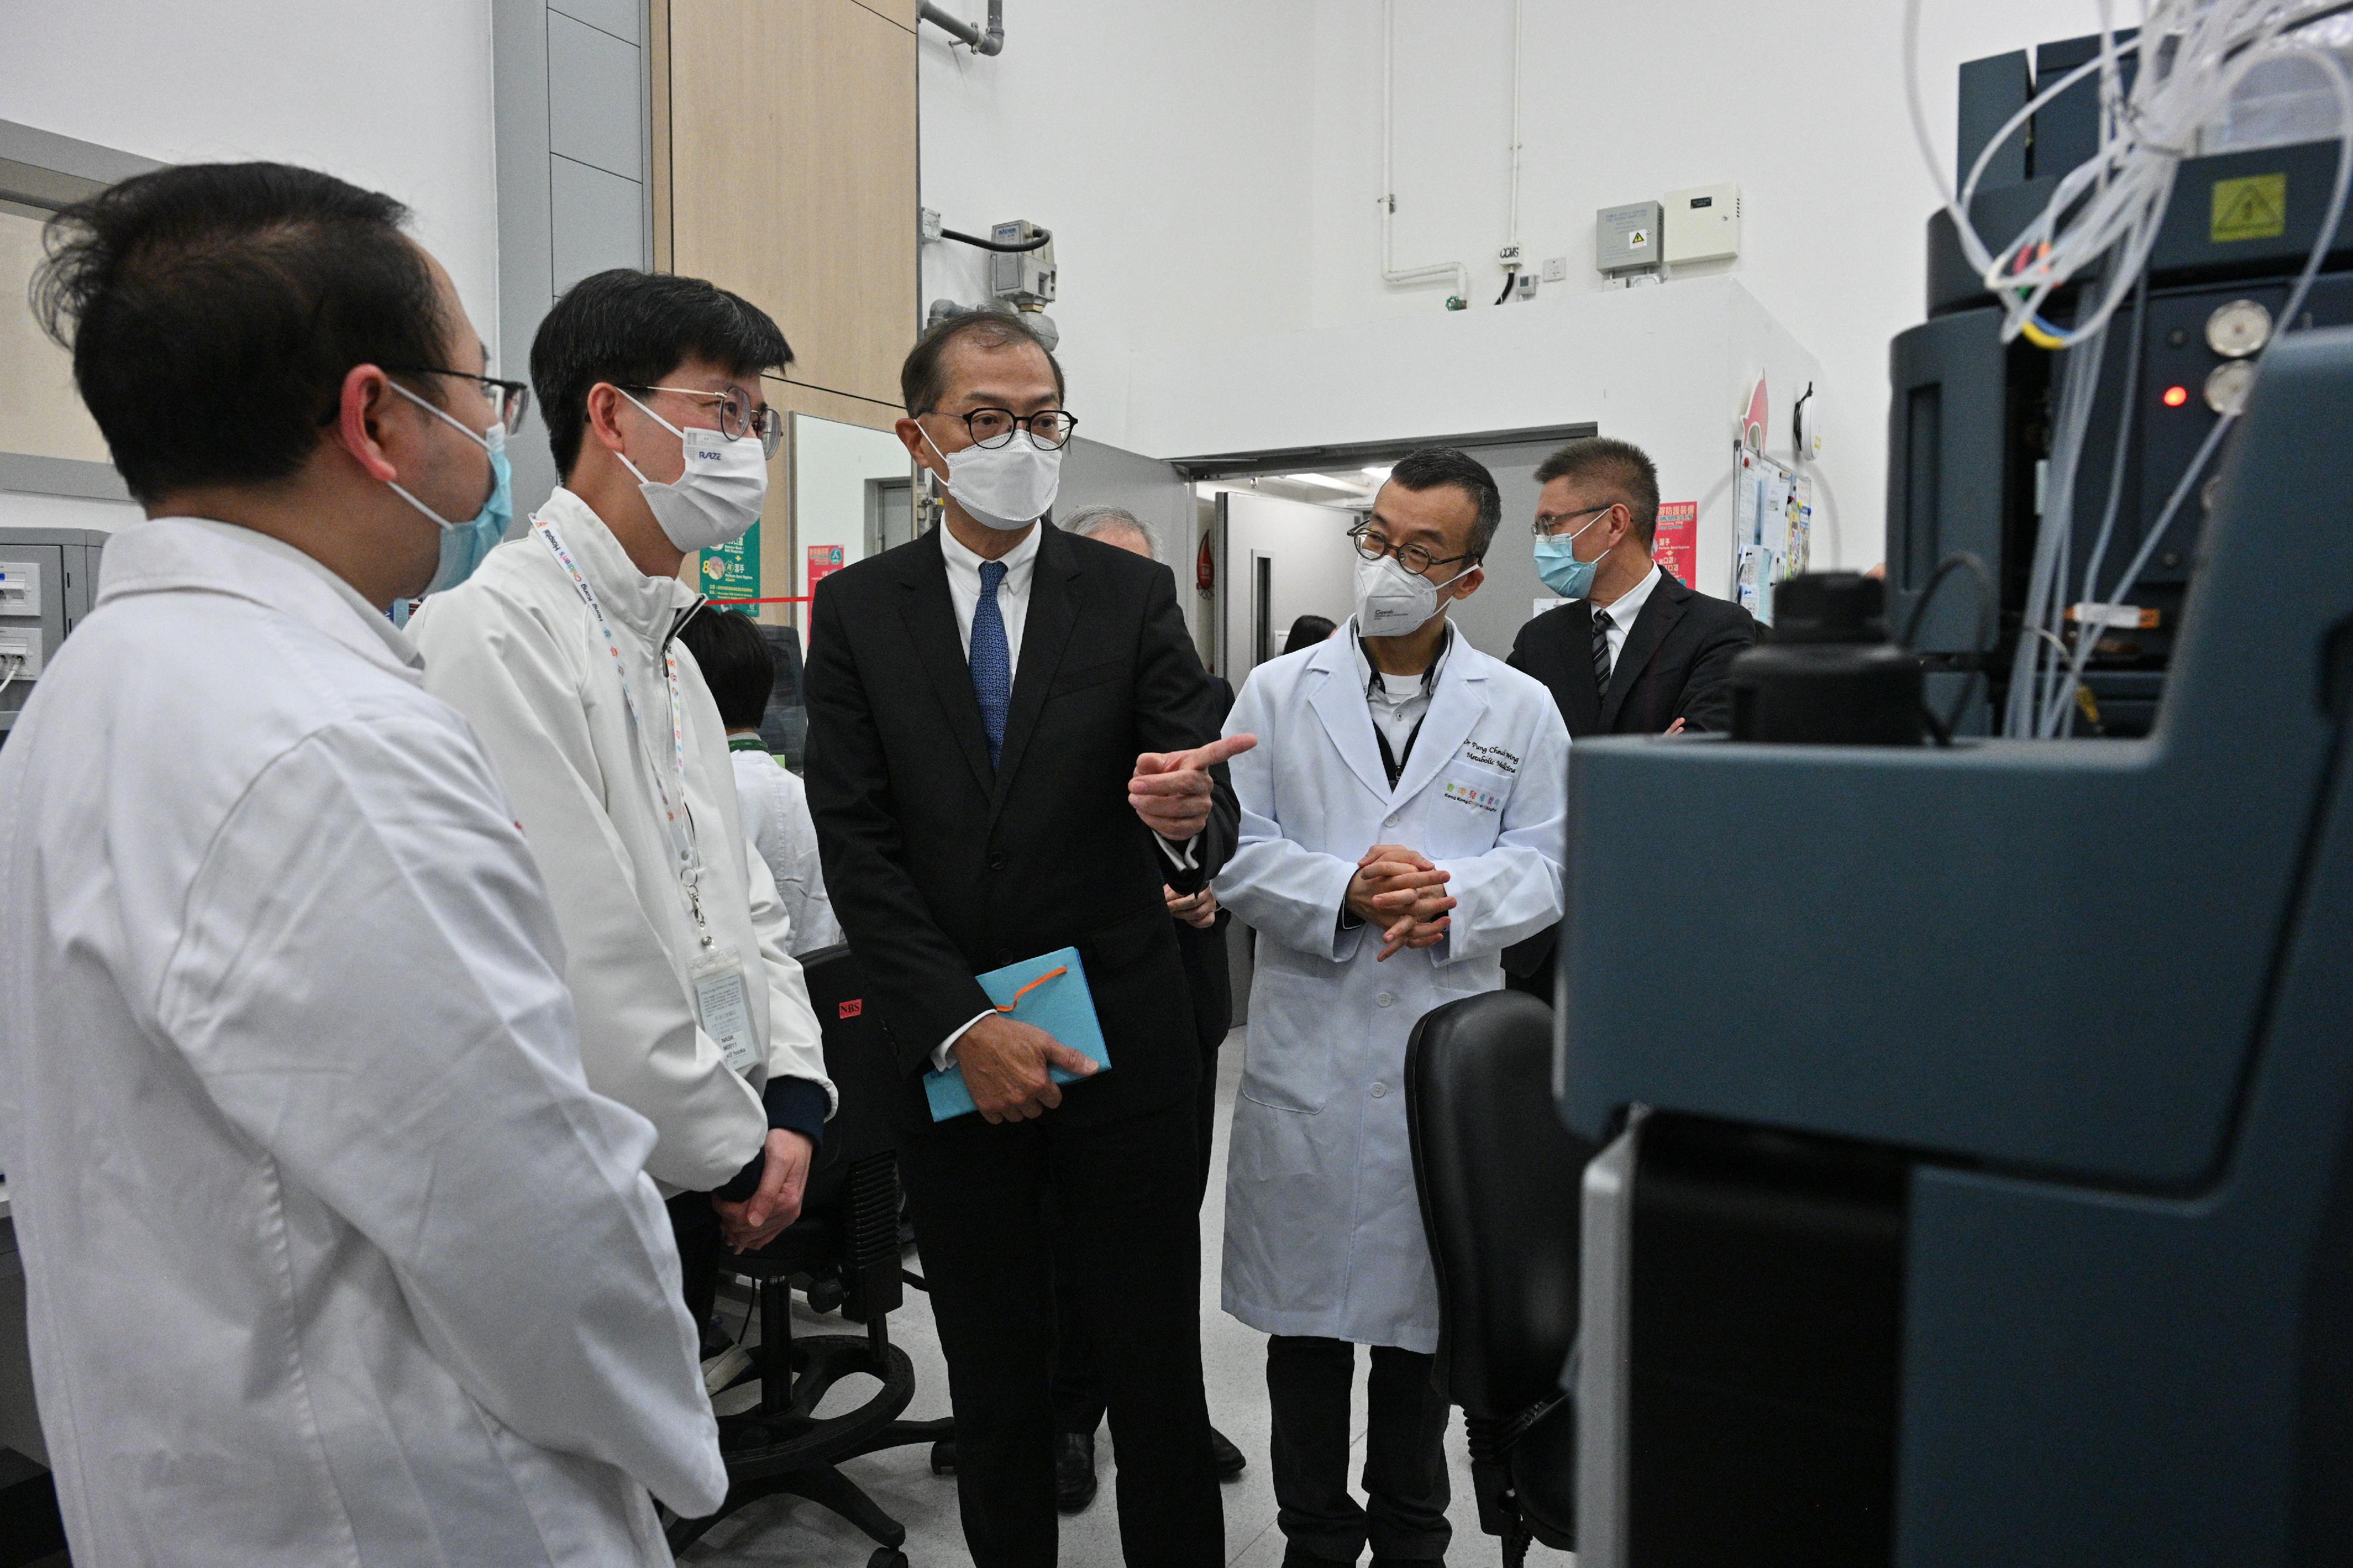 The Secretary for Health, Professor Lo Chung-mau (third right), visited the newborn screening for inborn errors of metabolism laboratory of the Hong Kong Children's Hospital today (February 2).
